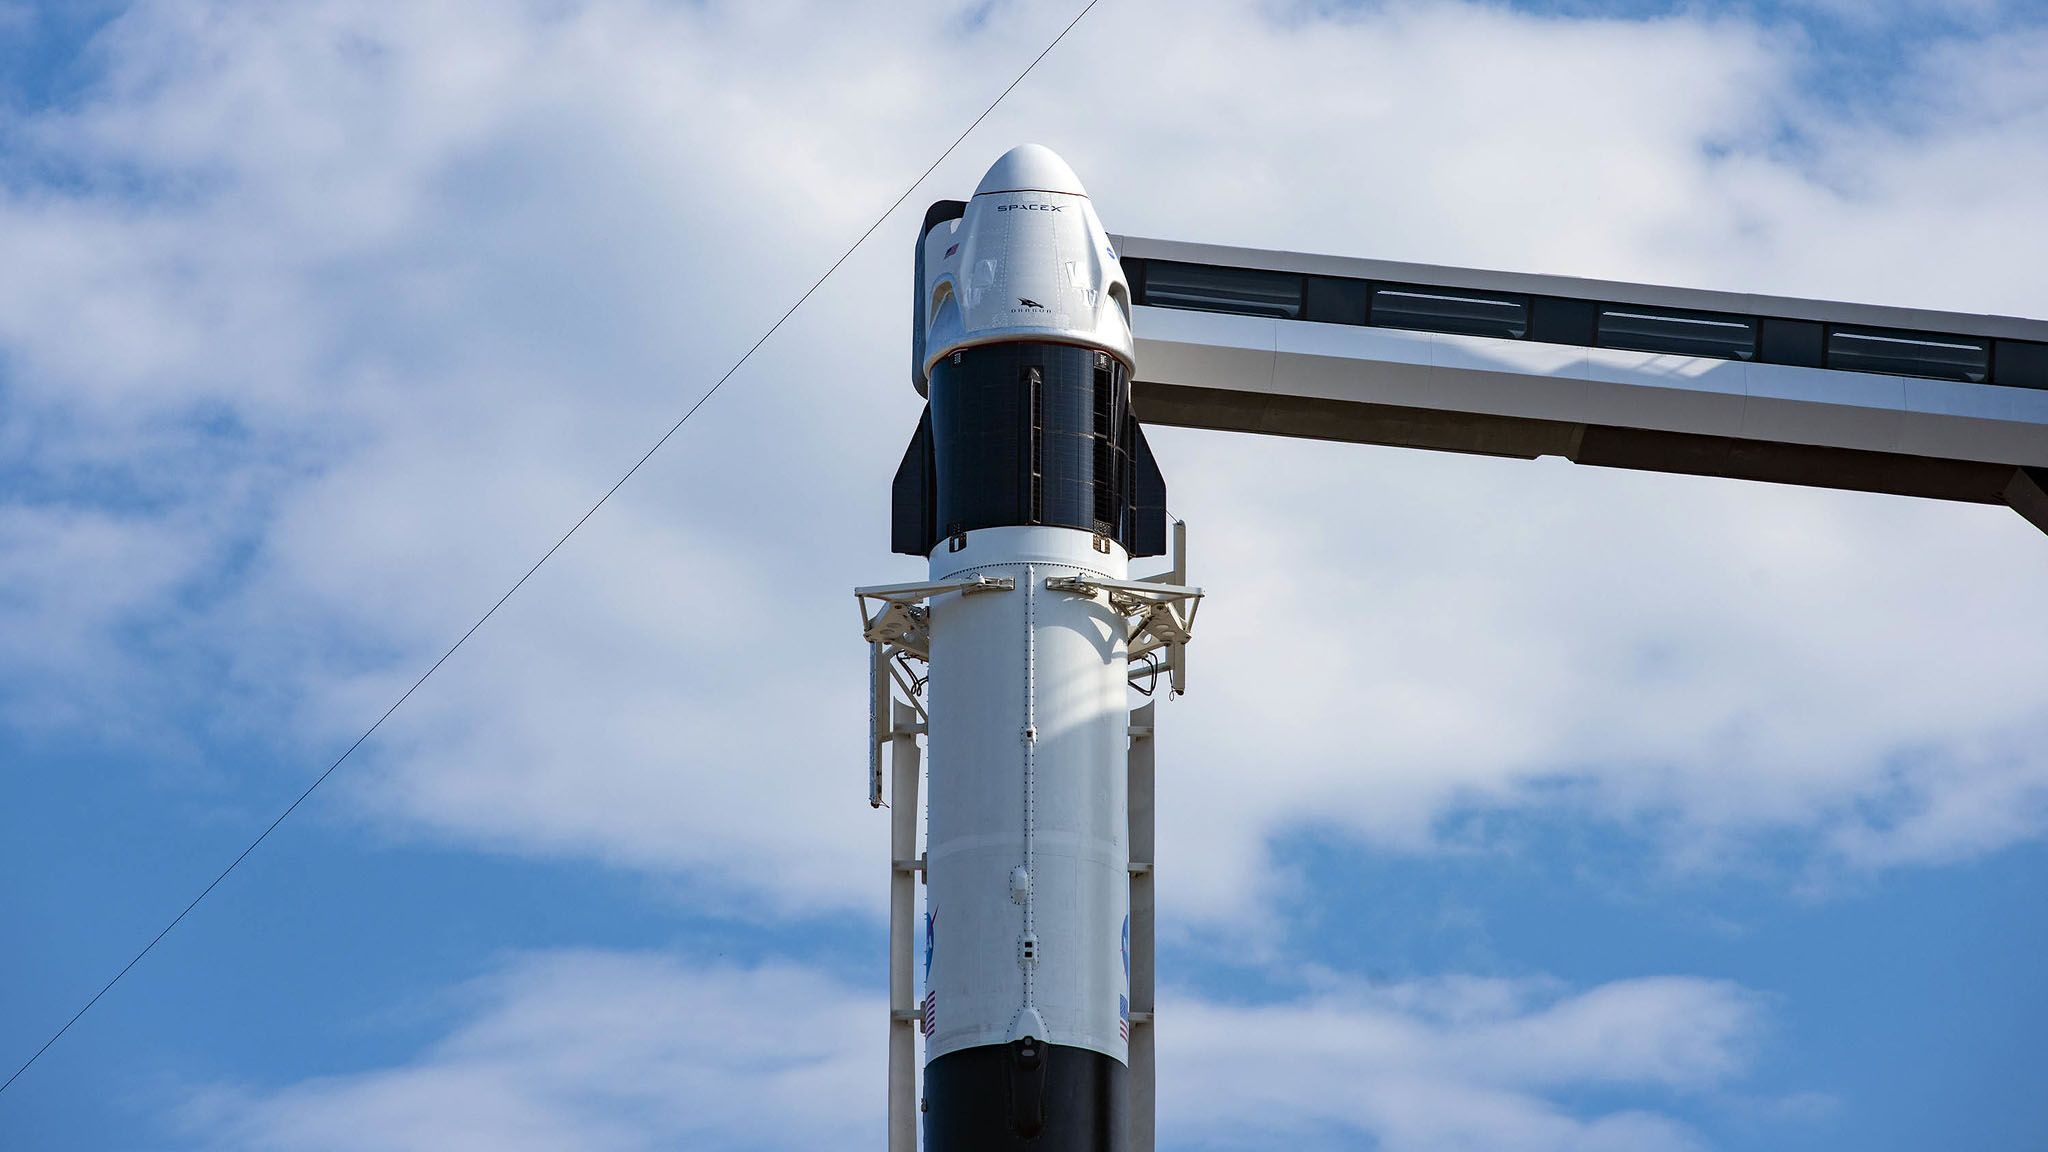 It's official: SpaceX is 'go' to launch NASA astronauts on Crew